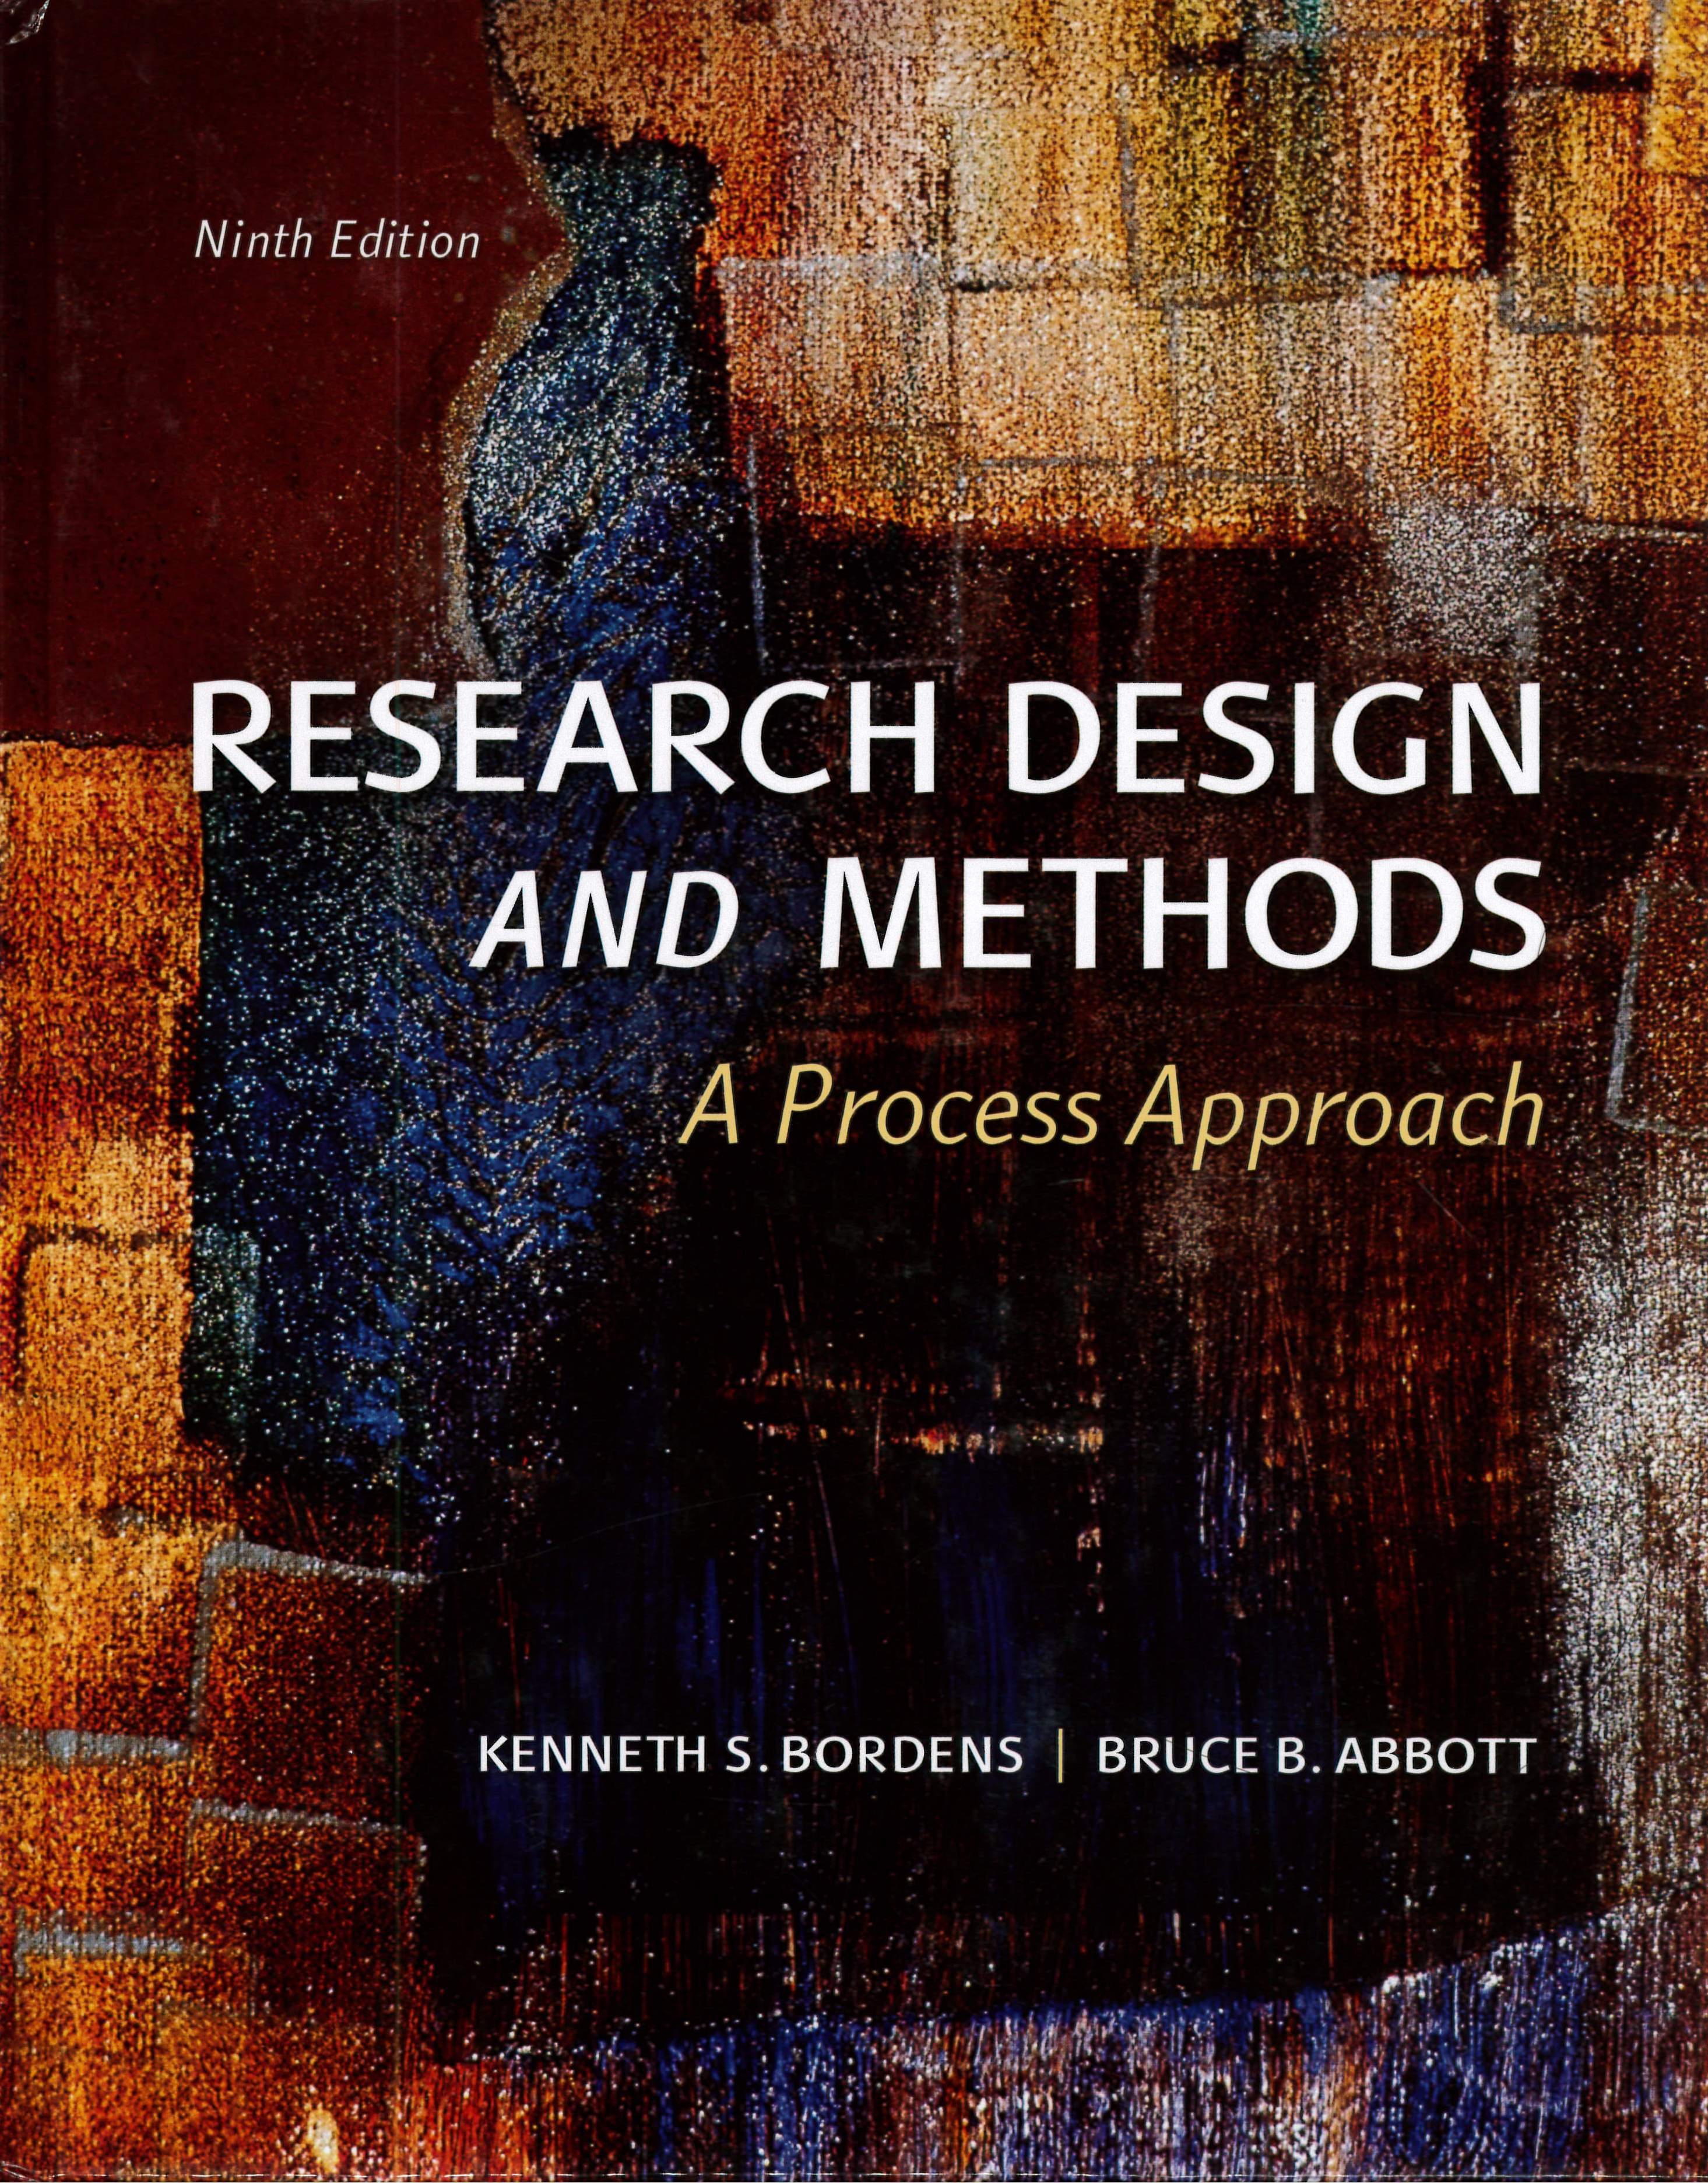 Research Design and Methods: A Process Approach 9/e